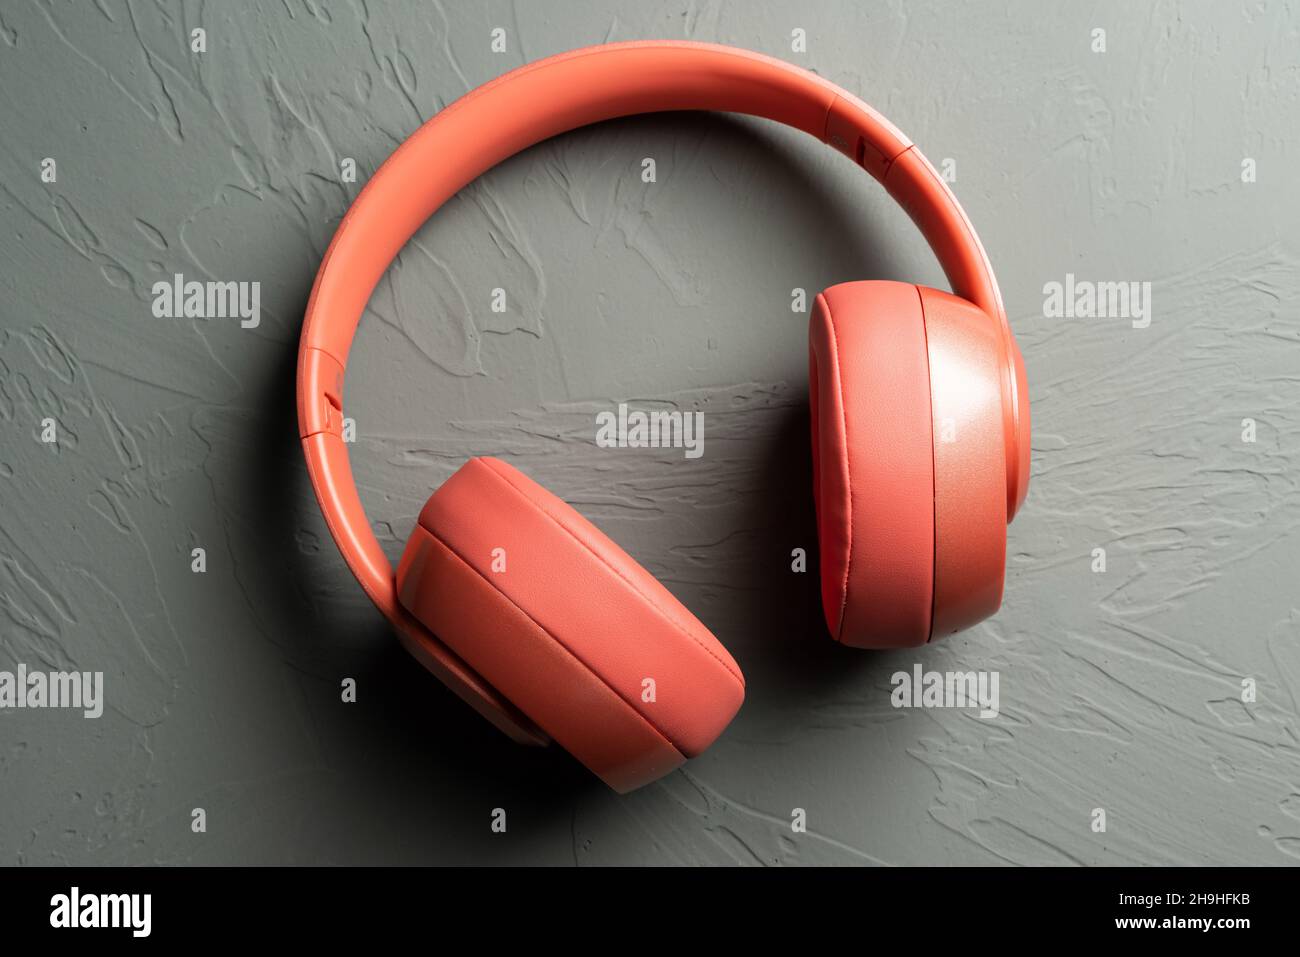 a red headphone on gray background Stock Photo